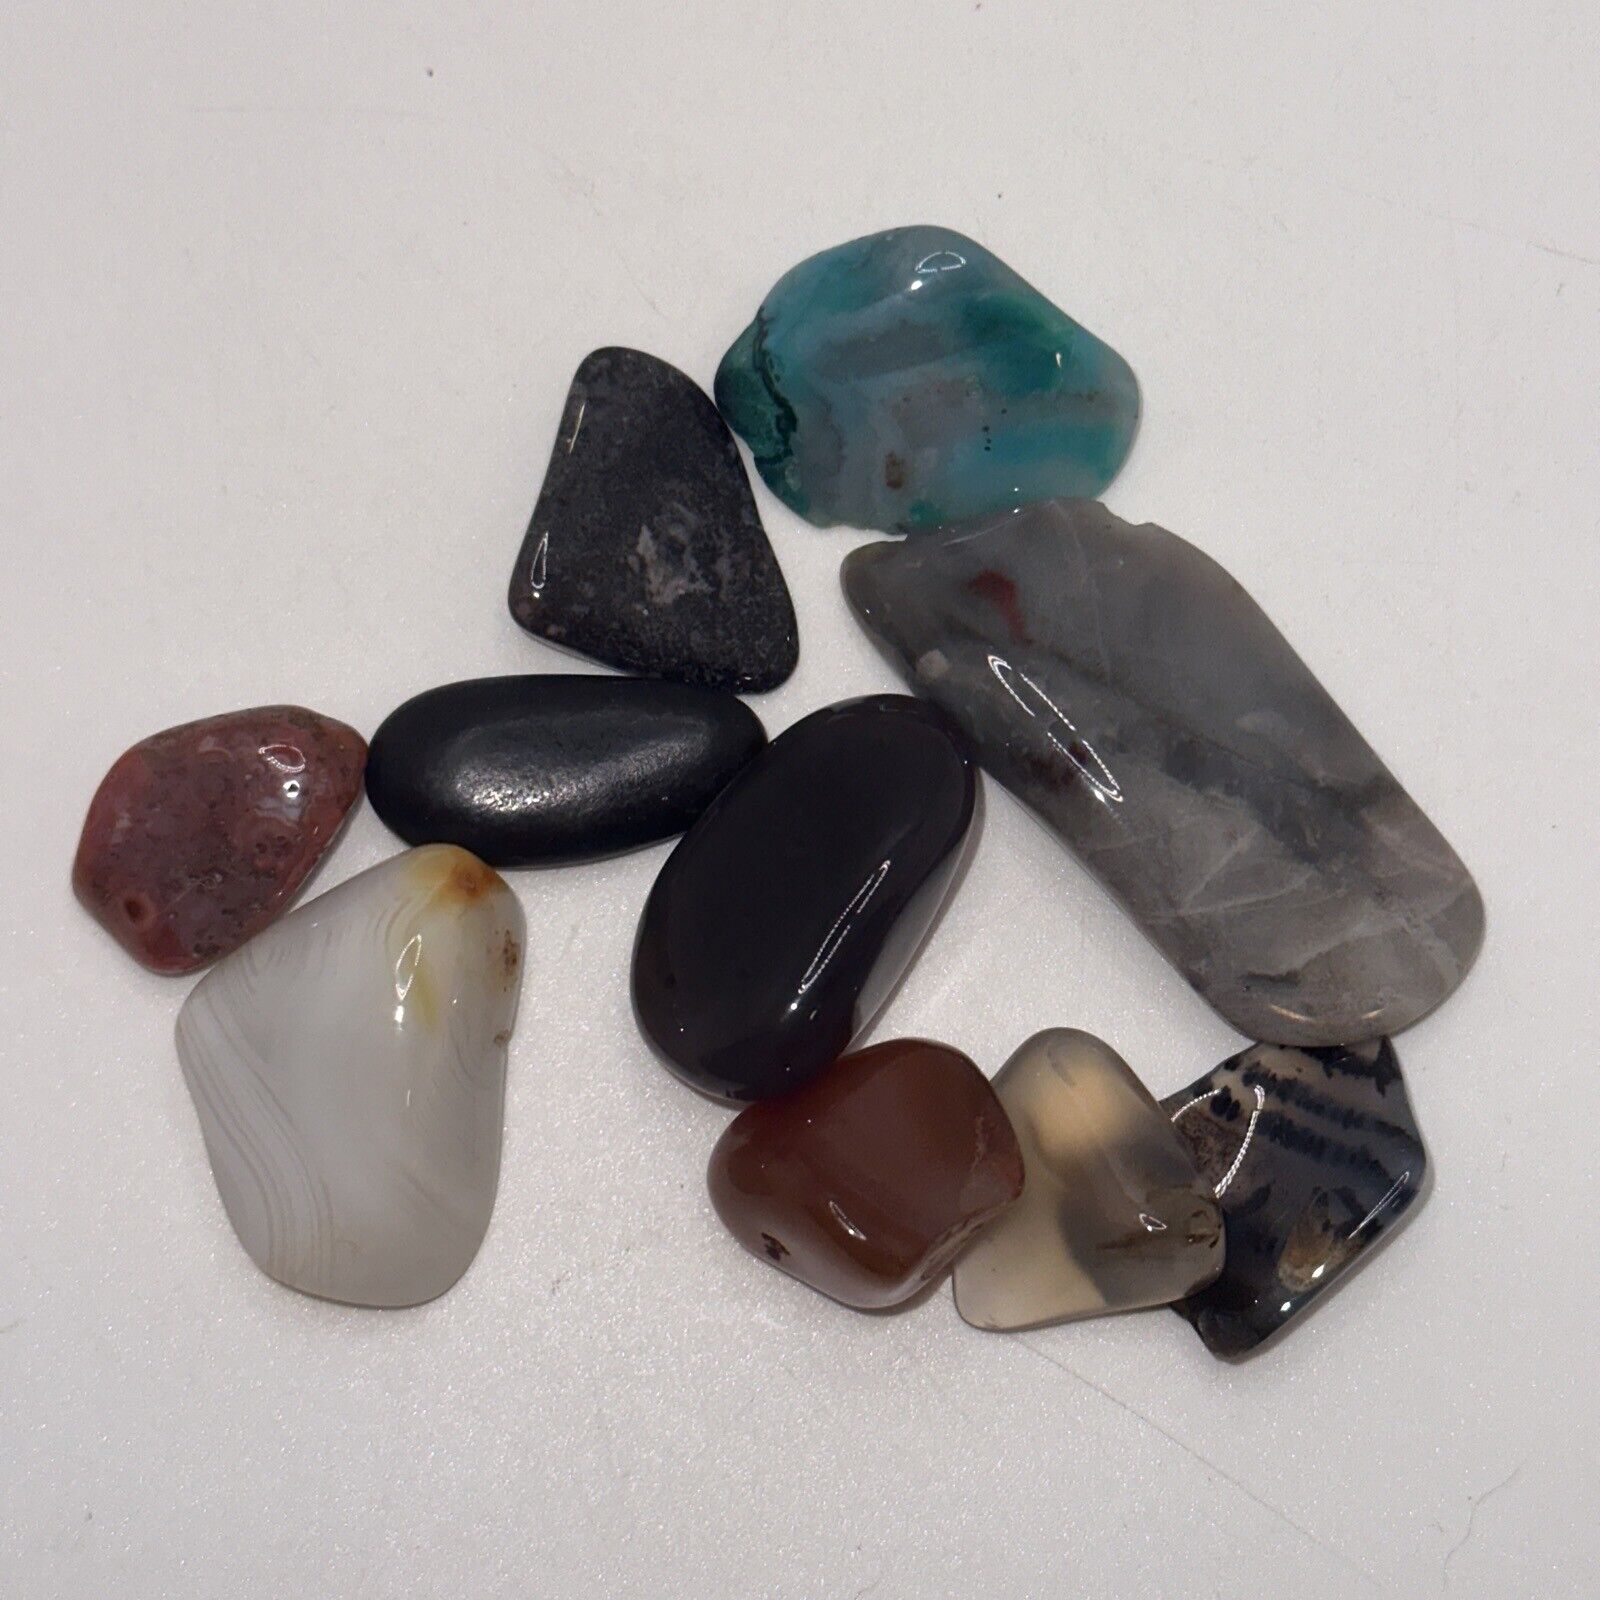 Lot of 10 Polished Stones